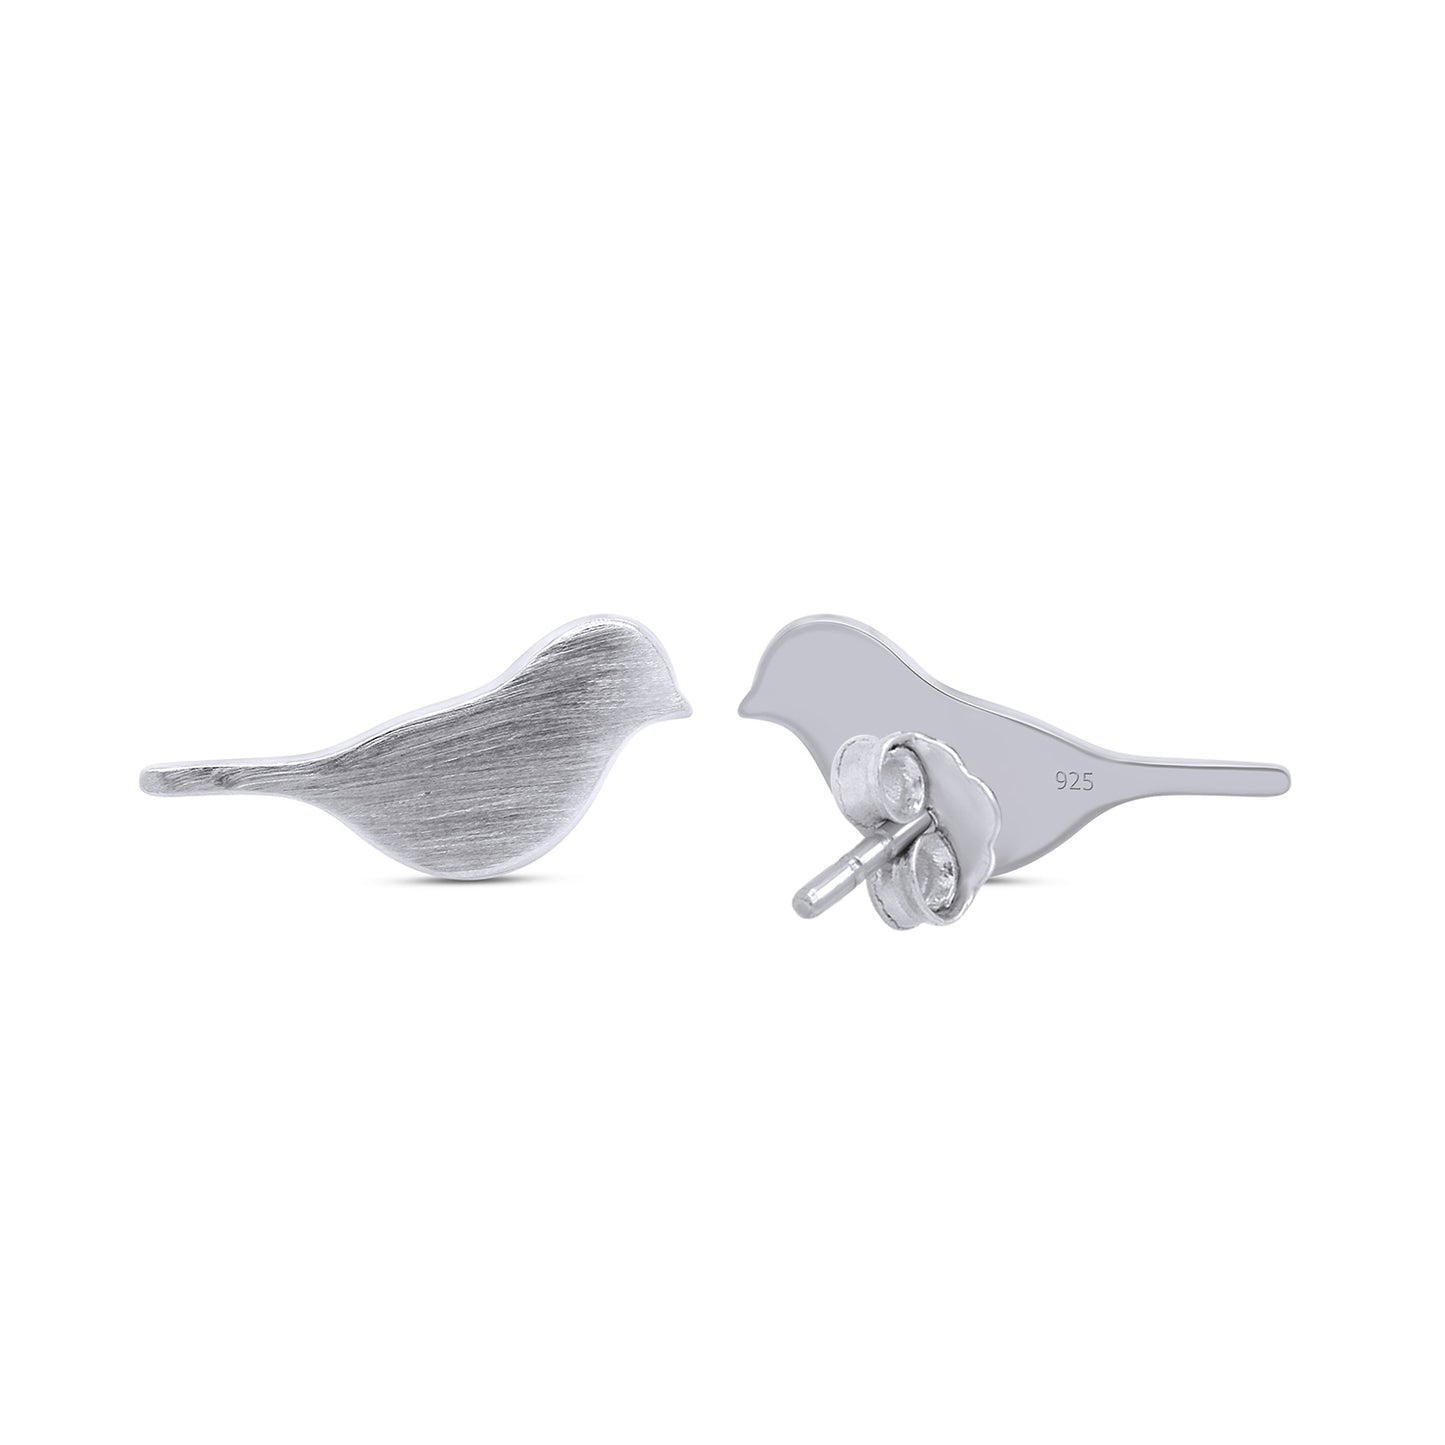 Cute Delicated Pair of Little DOVE Bird Stud Earrings in 925 Sterling Silver